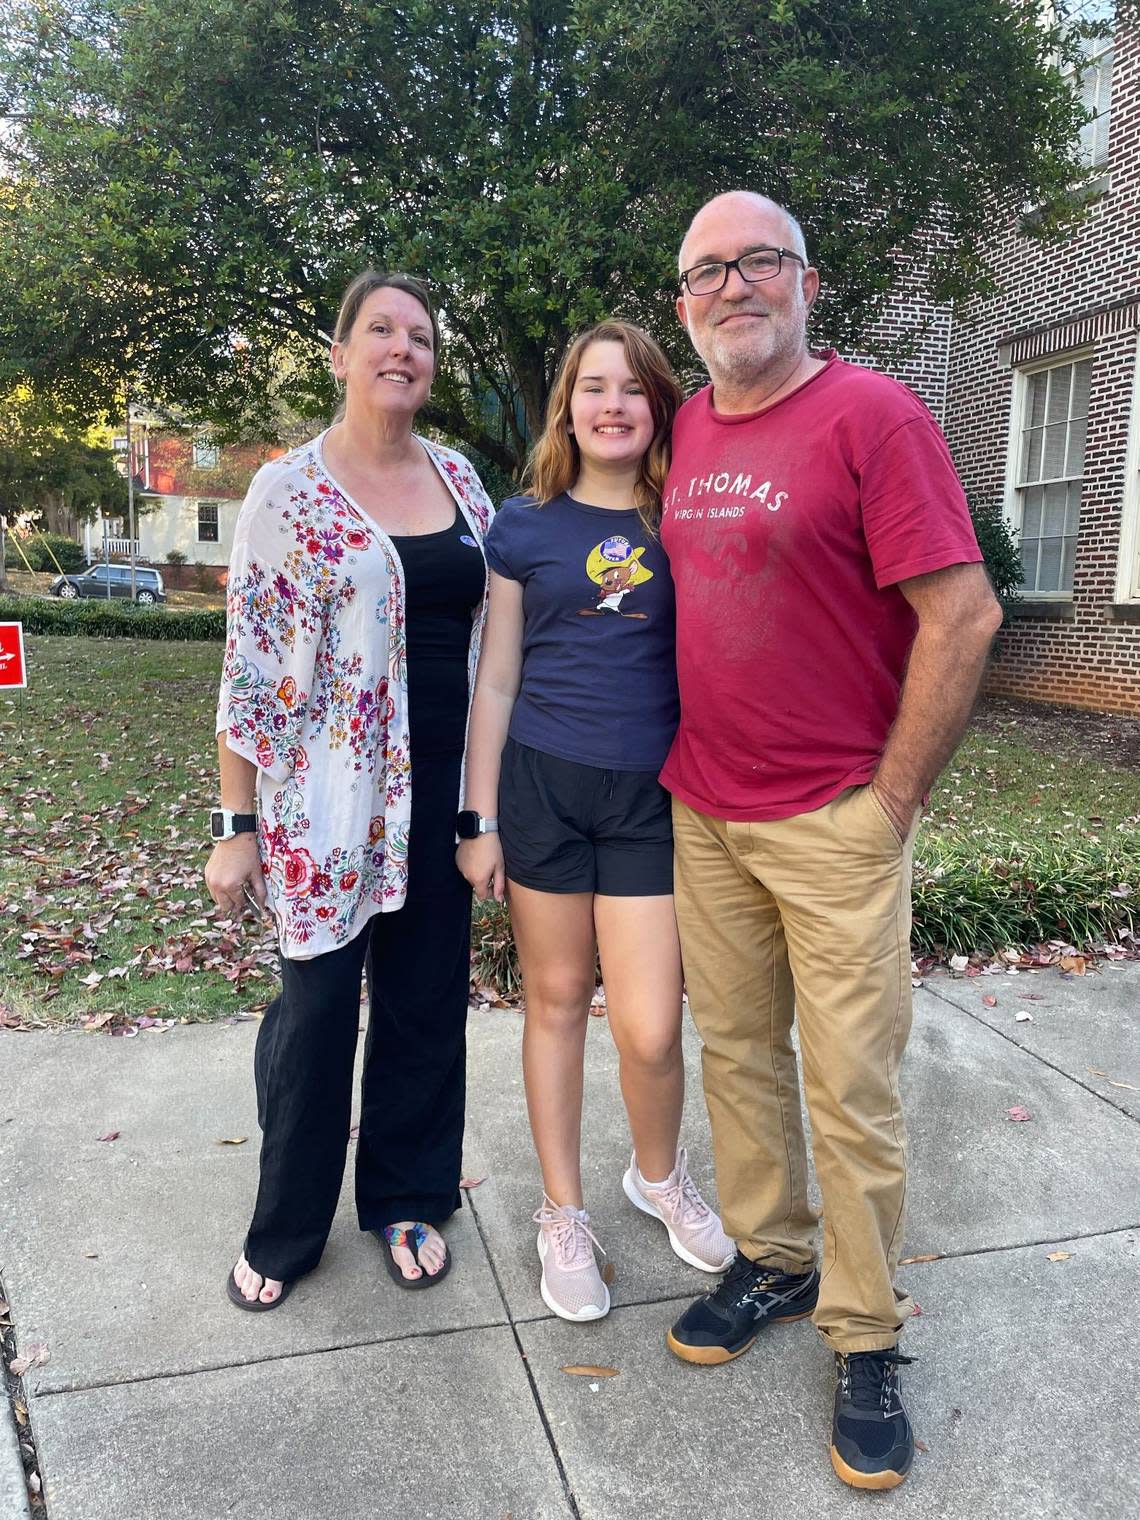 Angela and Kent Kilpatrick took their daughter Jules along to the polls at Project Enlightenment School in Raleigh on Nov. 8, 2022.